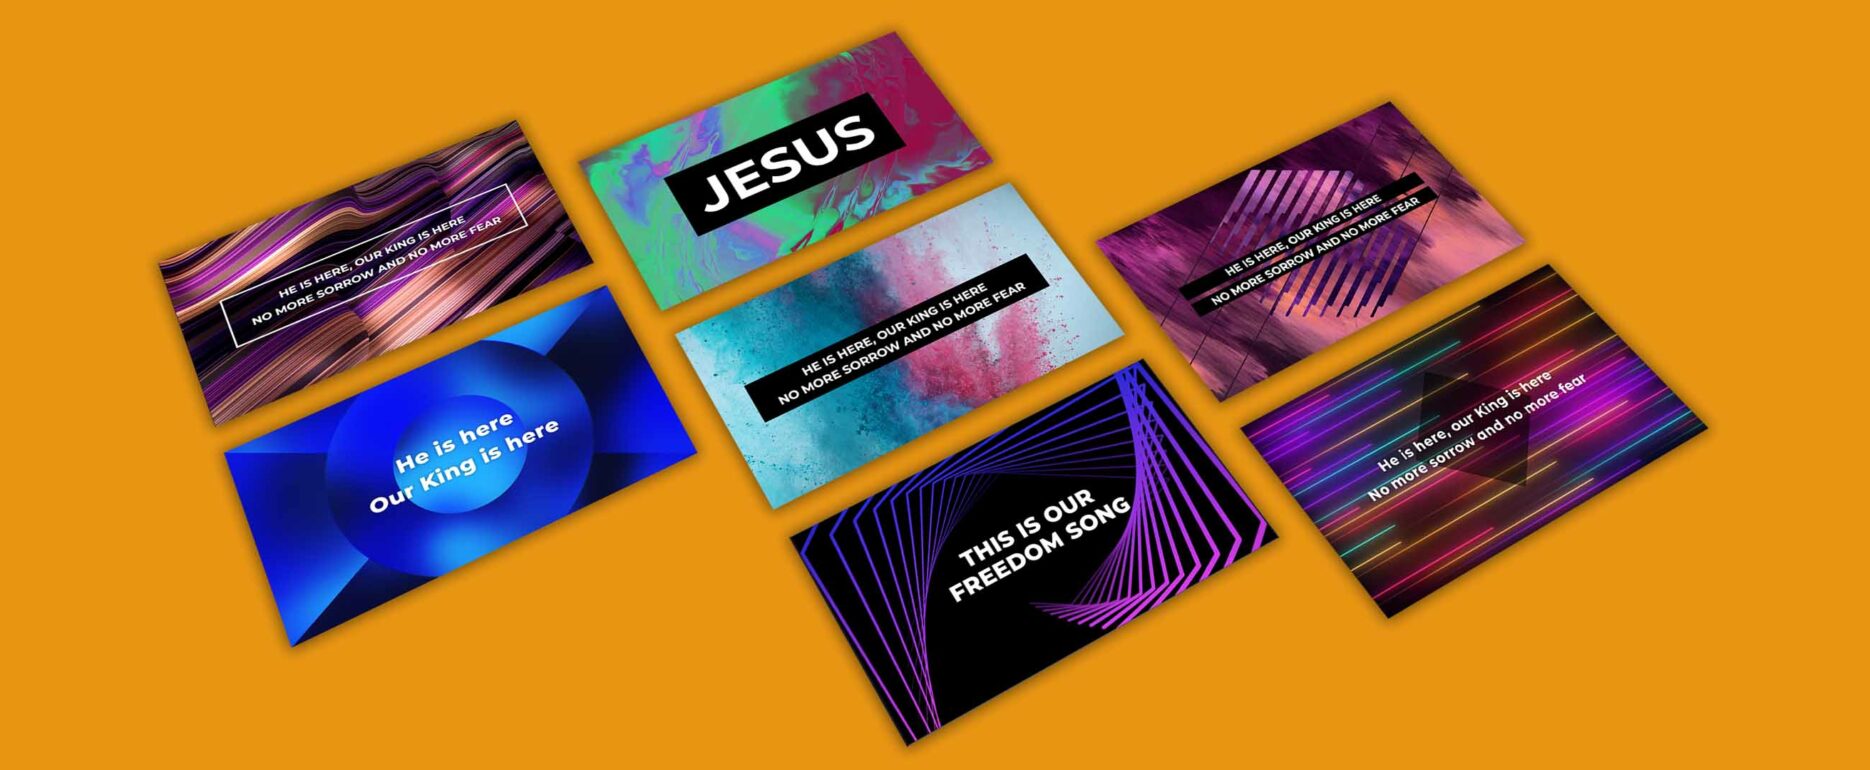 Additional Church Motion Graphics Images